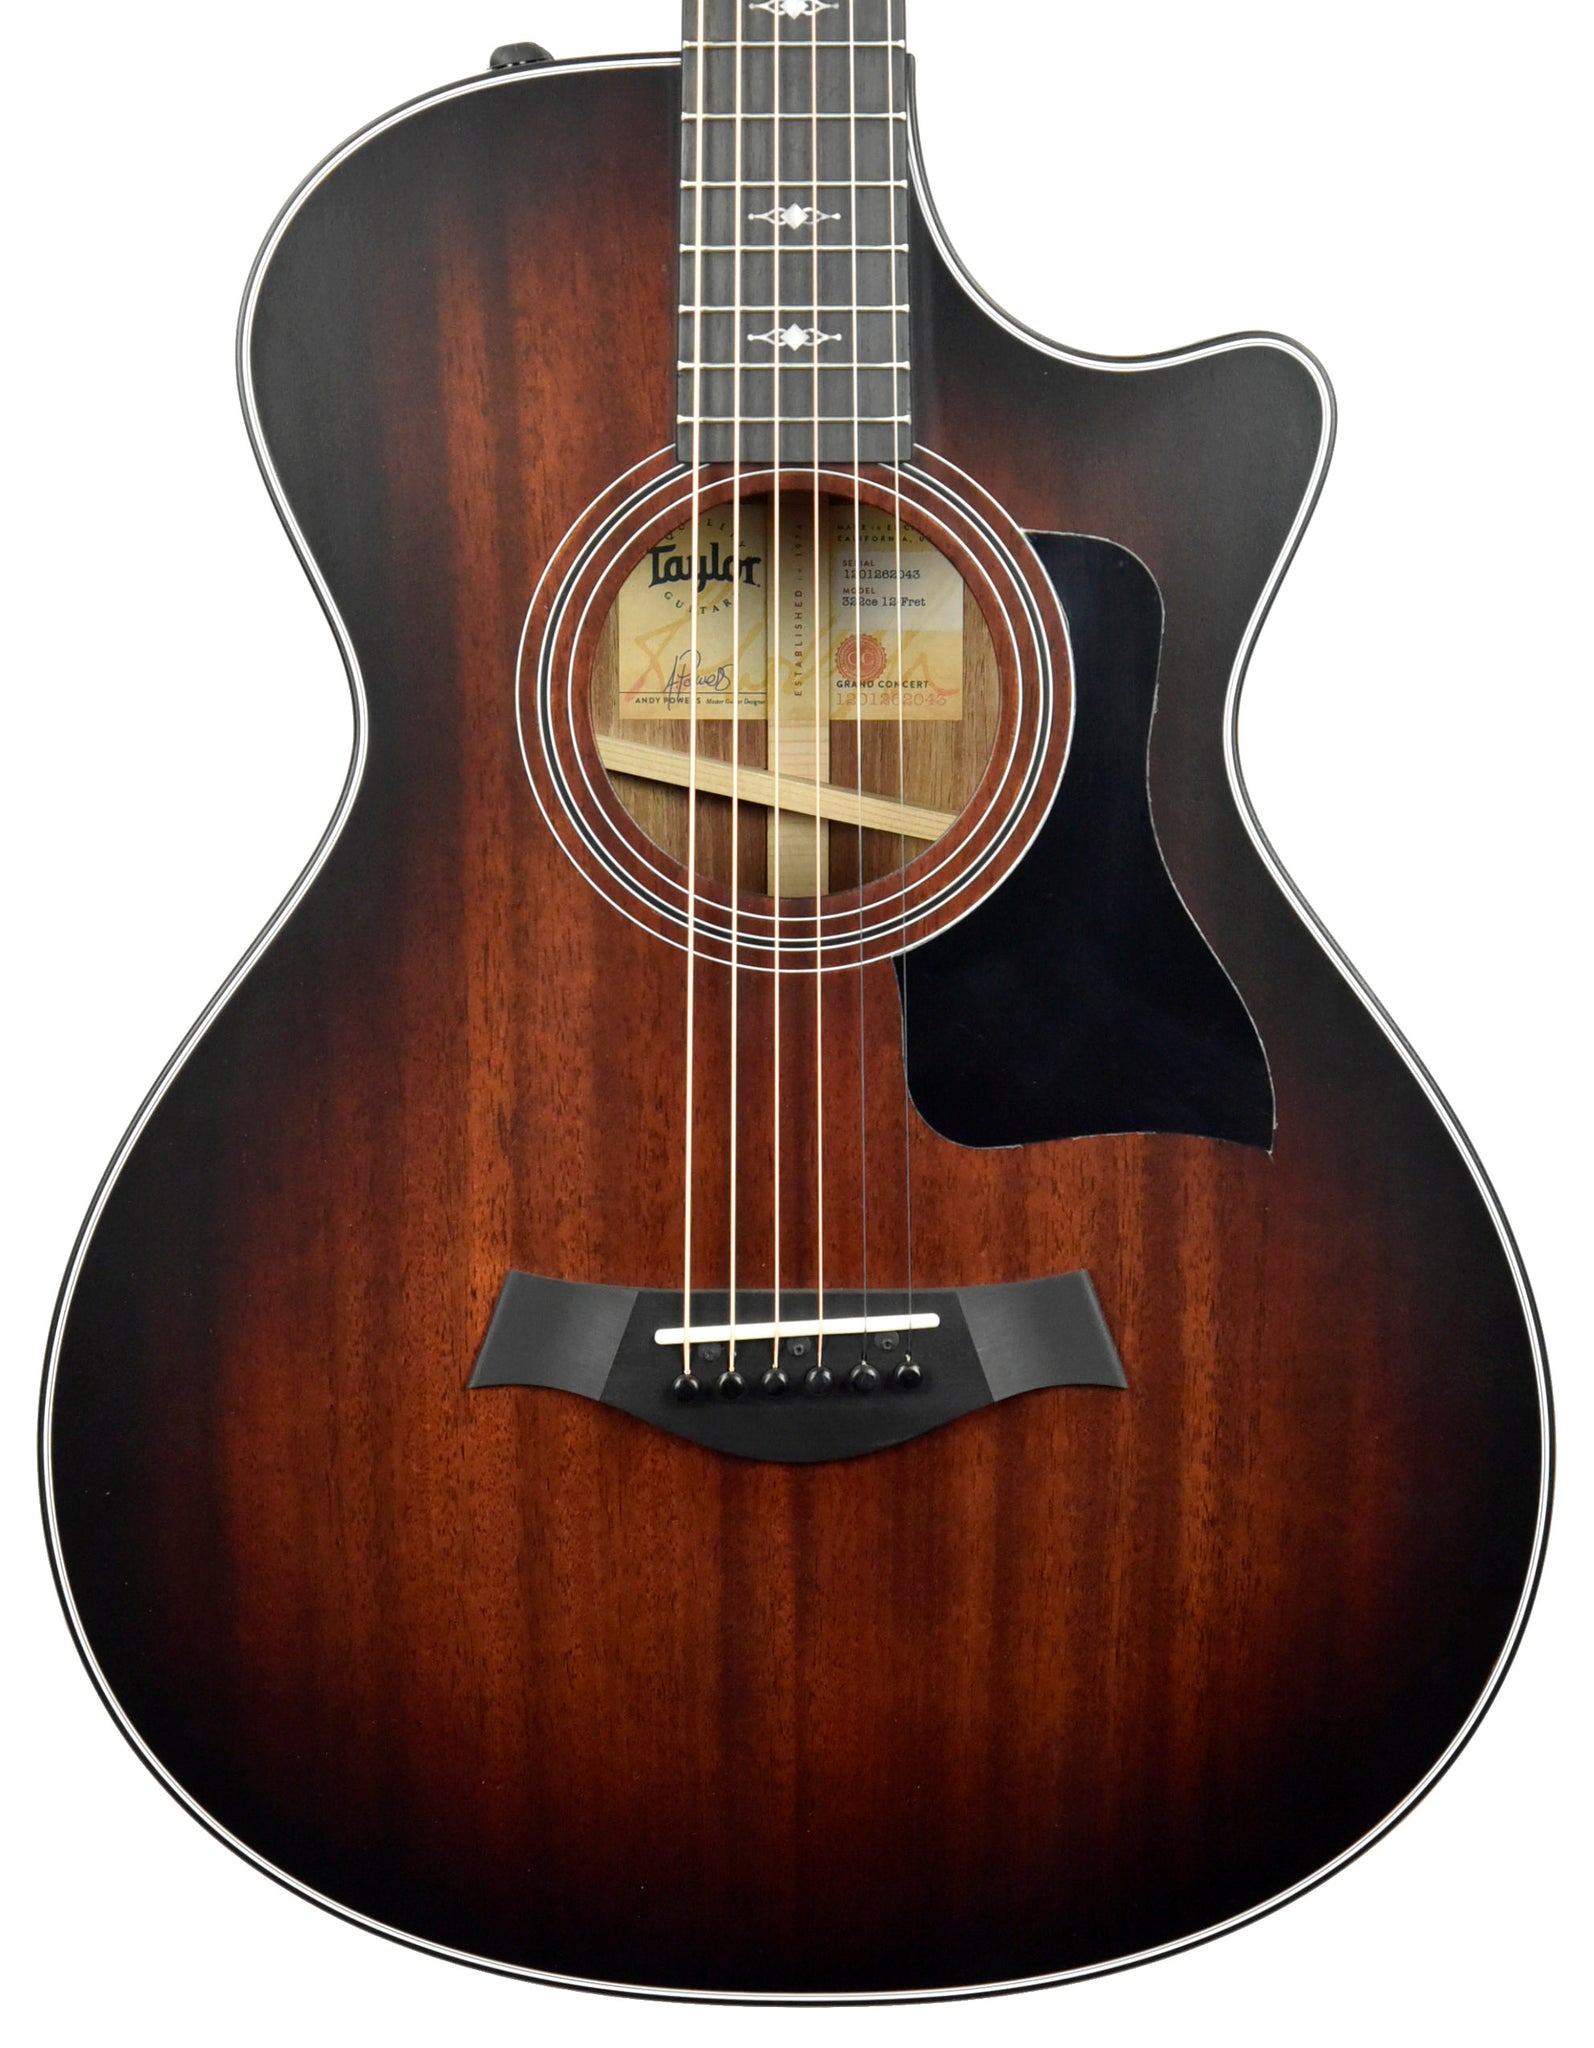 Taylor 322ce 12 Fret Acoustic Electric Guitar in Shaded Edge Burst 